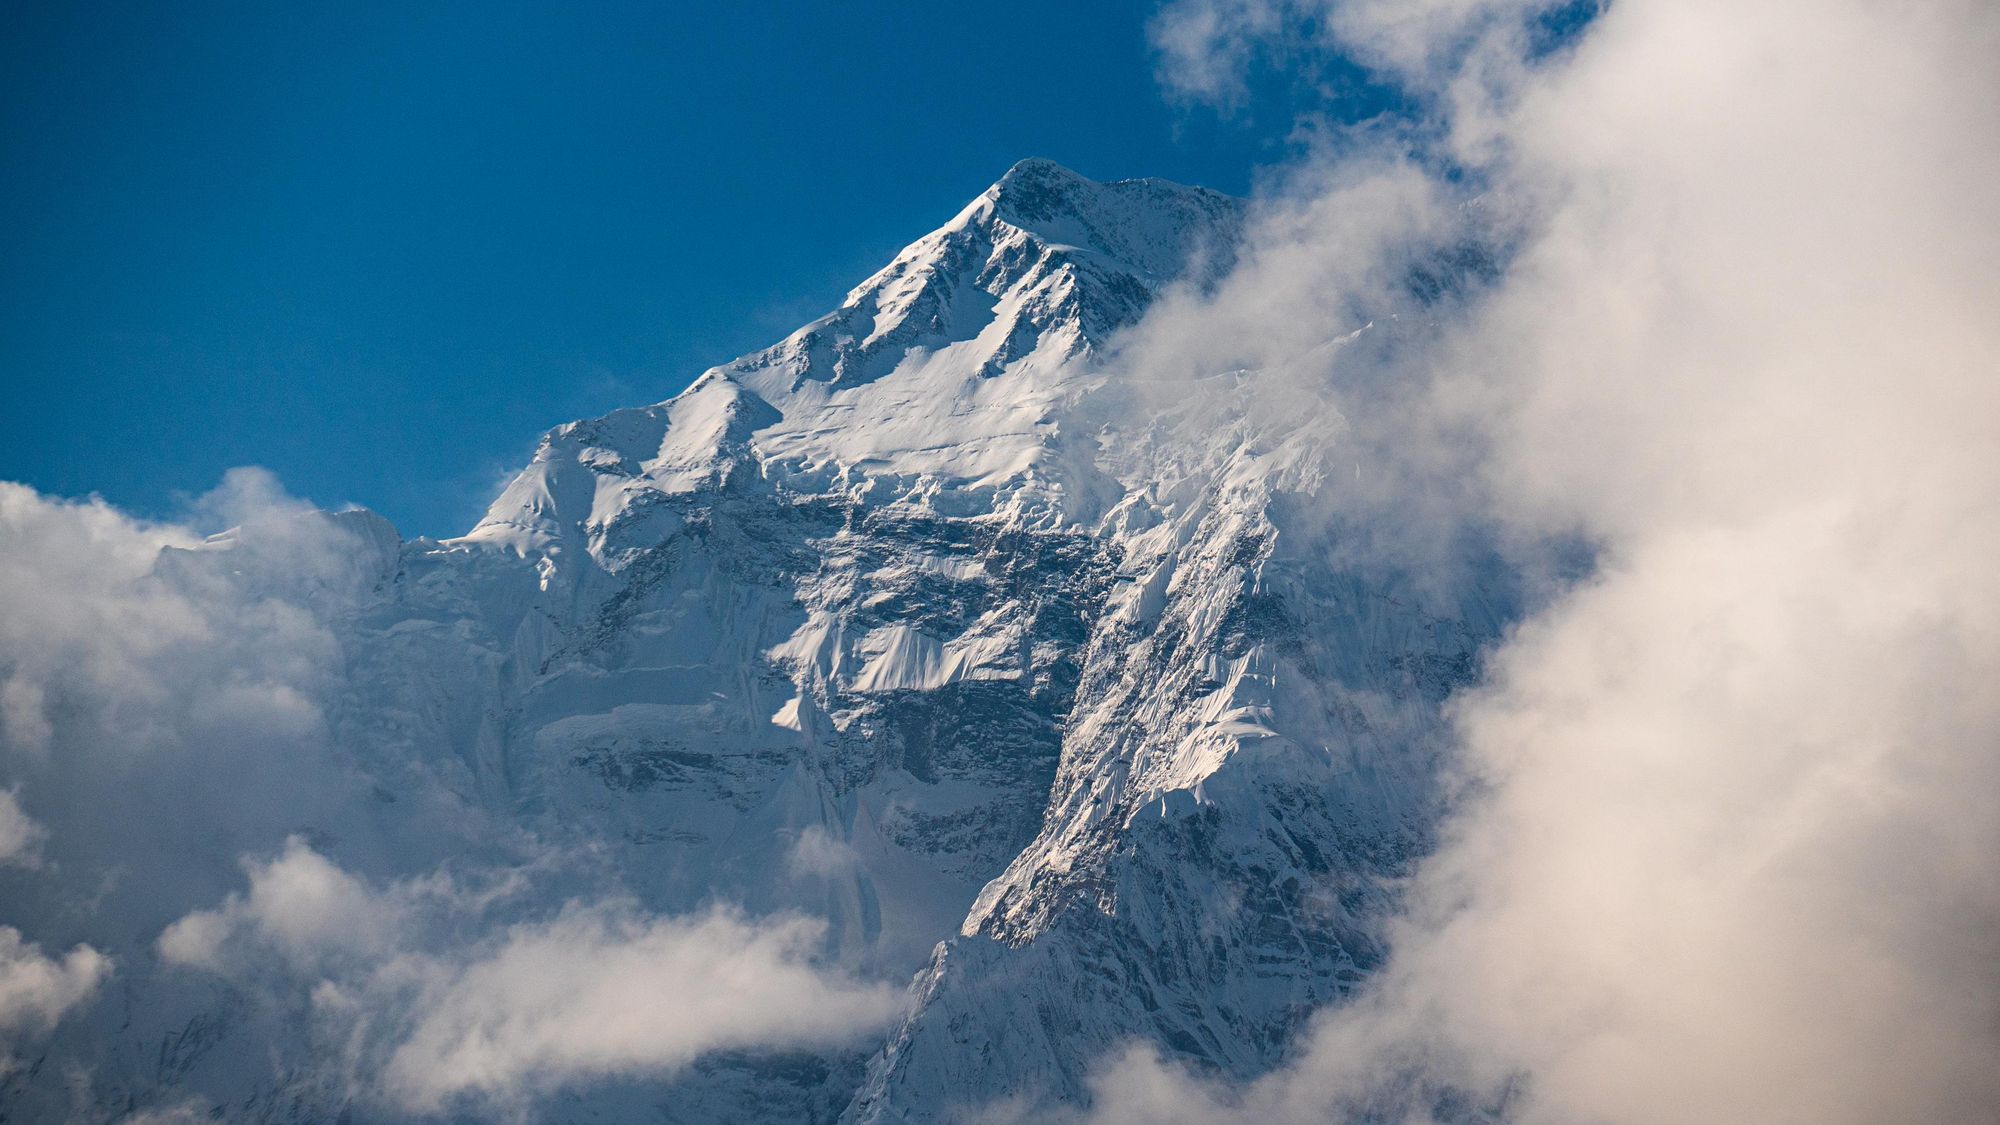 The mighty peaks of the high Himalayas along the Annapurna Circuit. Photo: Josh Edwards